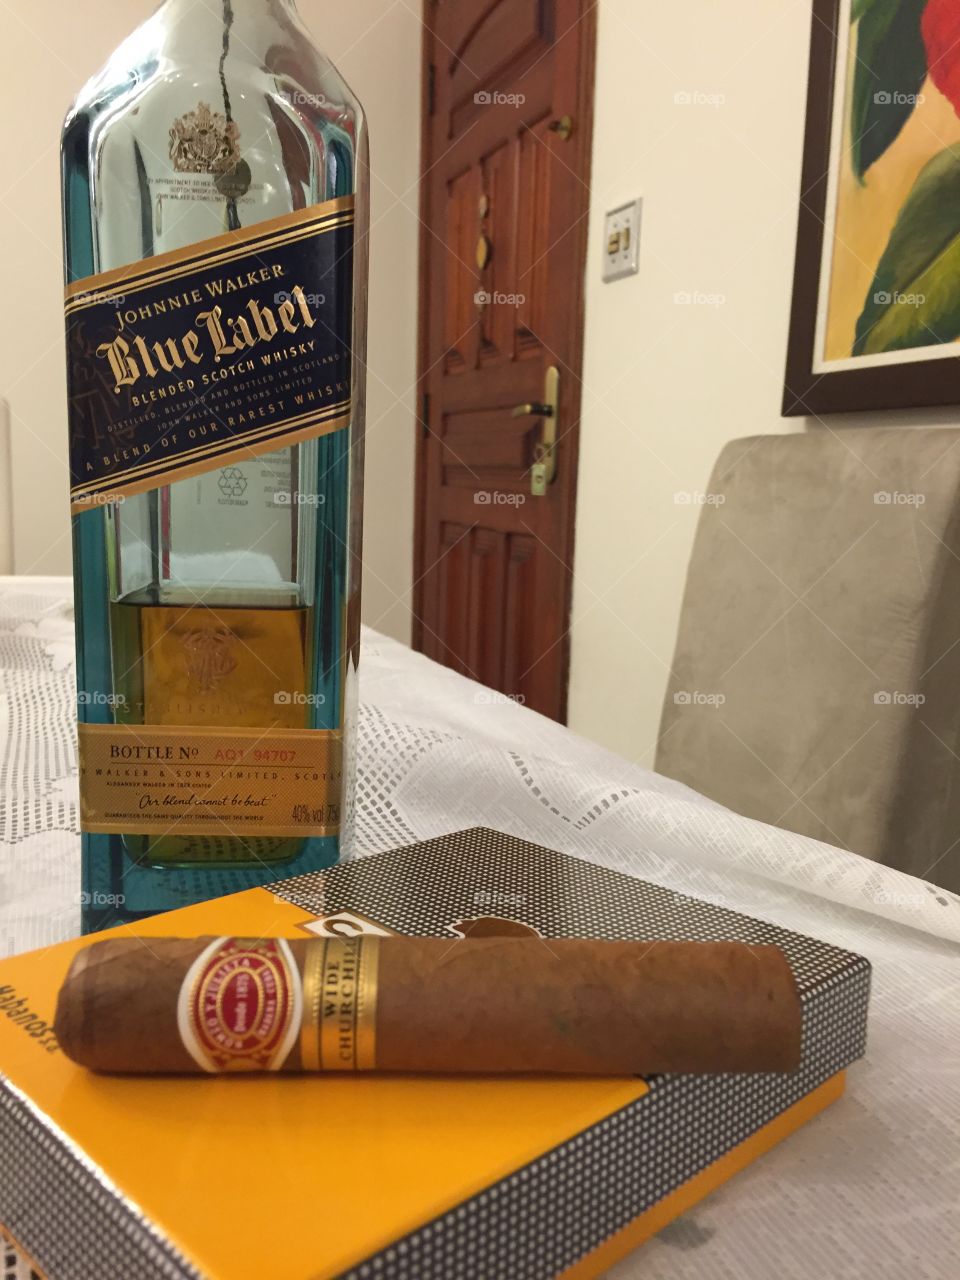 Whisky and cigar